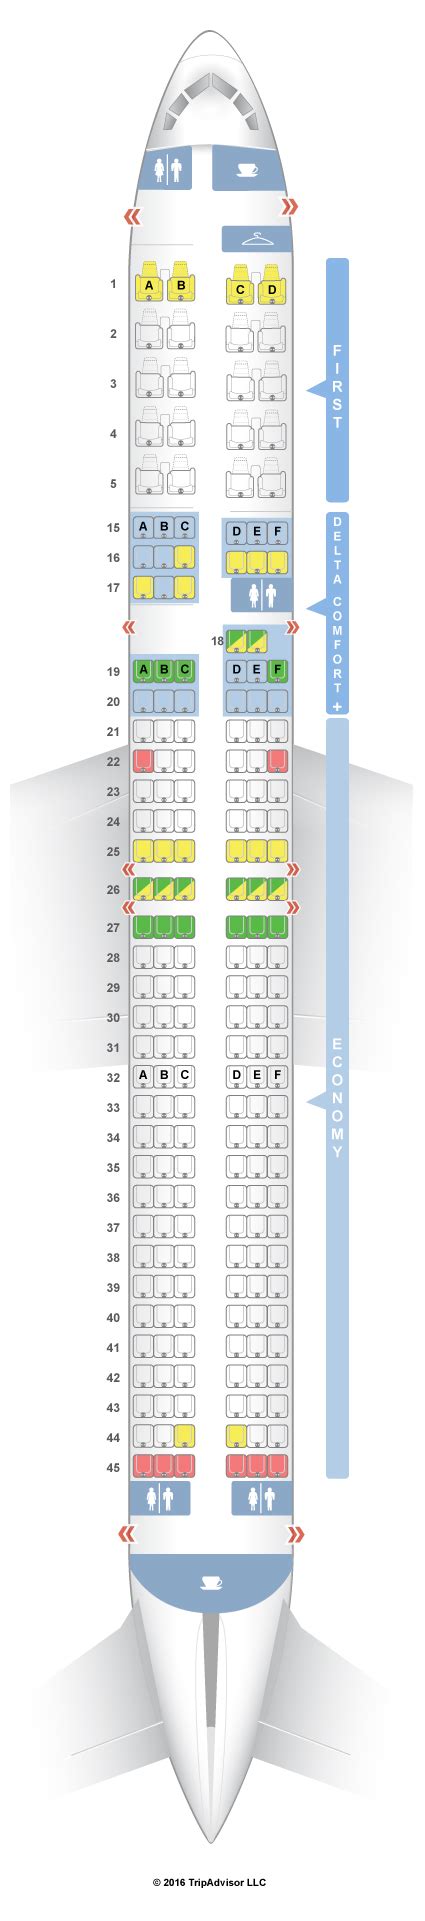 For your next Delta flight, use this seating chart to get the most comfortable seats, legroom, ... Boeing 757-200 (757) Boeing 757-200 (75D) Boeing 757-200 (75G) Boeing 757-200 (75P) ... SeatGuru was created to help travelers choose the best seats and in-flight amenities. Forum; Mobile; FAQ; Contact Us;. 